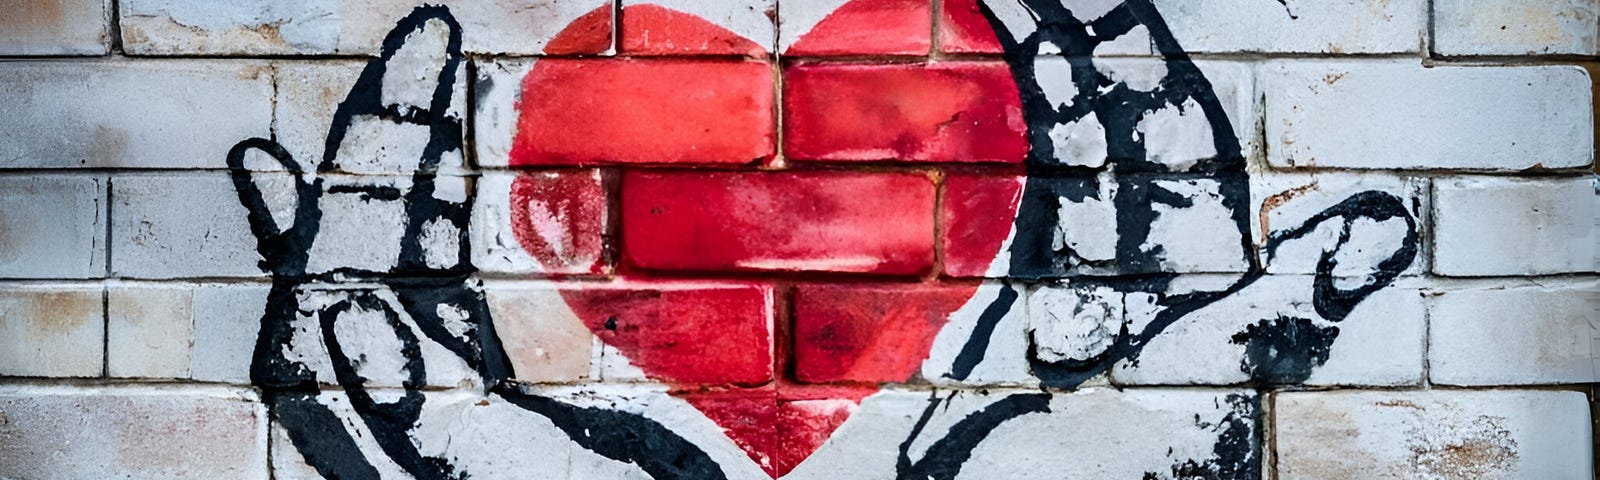 Graffiti on a brick wall with a red heart shape between an outline drawing of hands enfolding the heart.